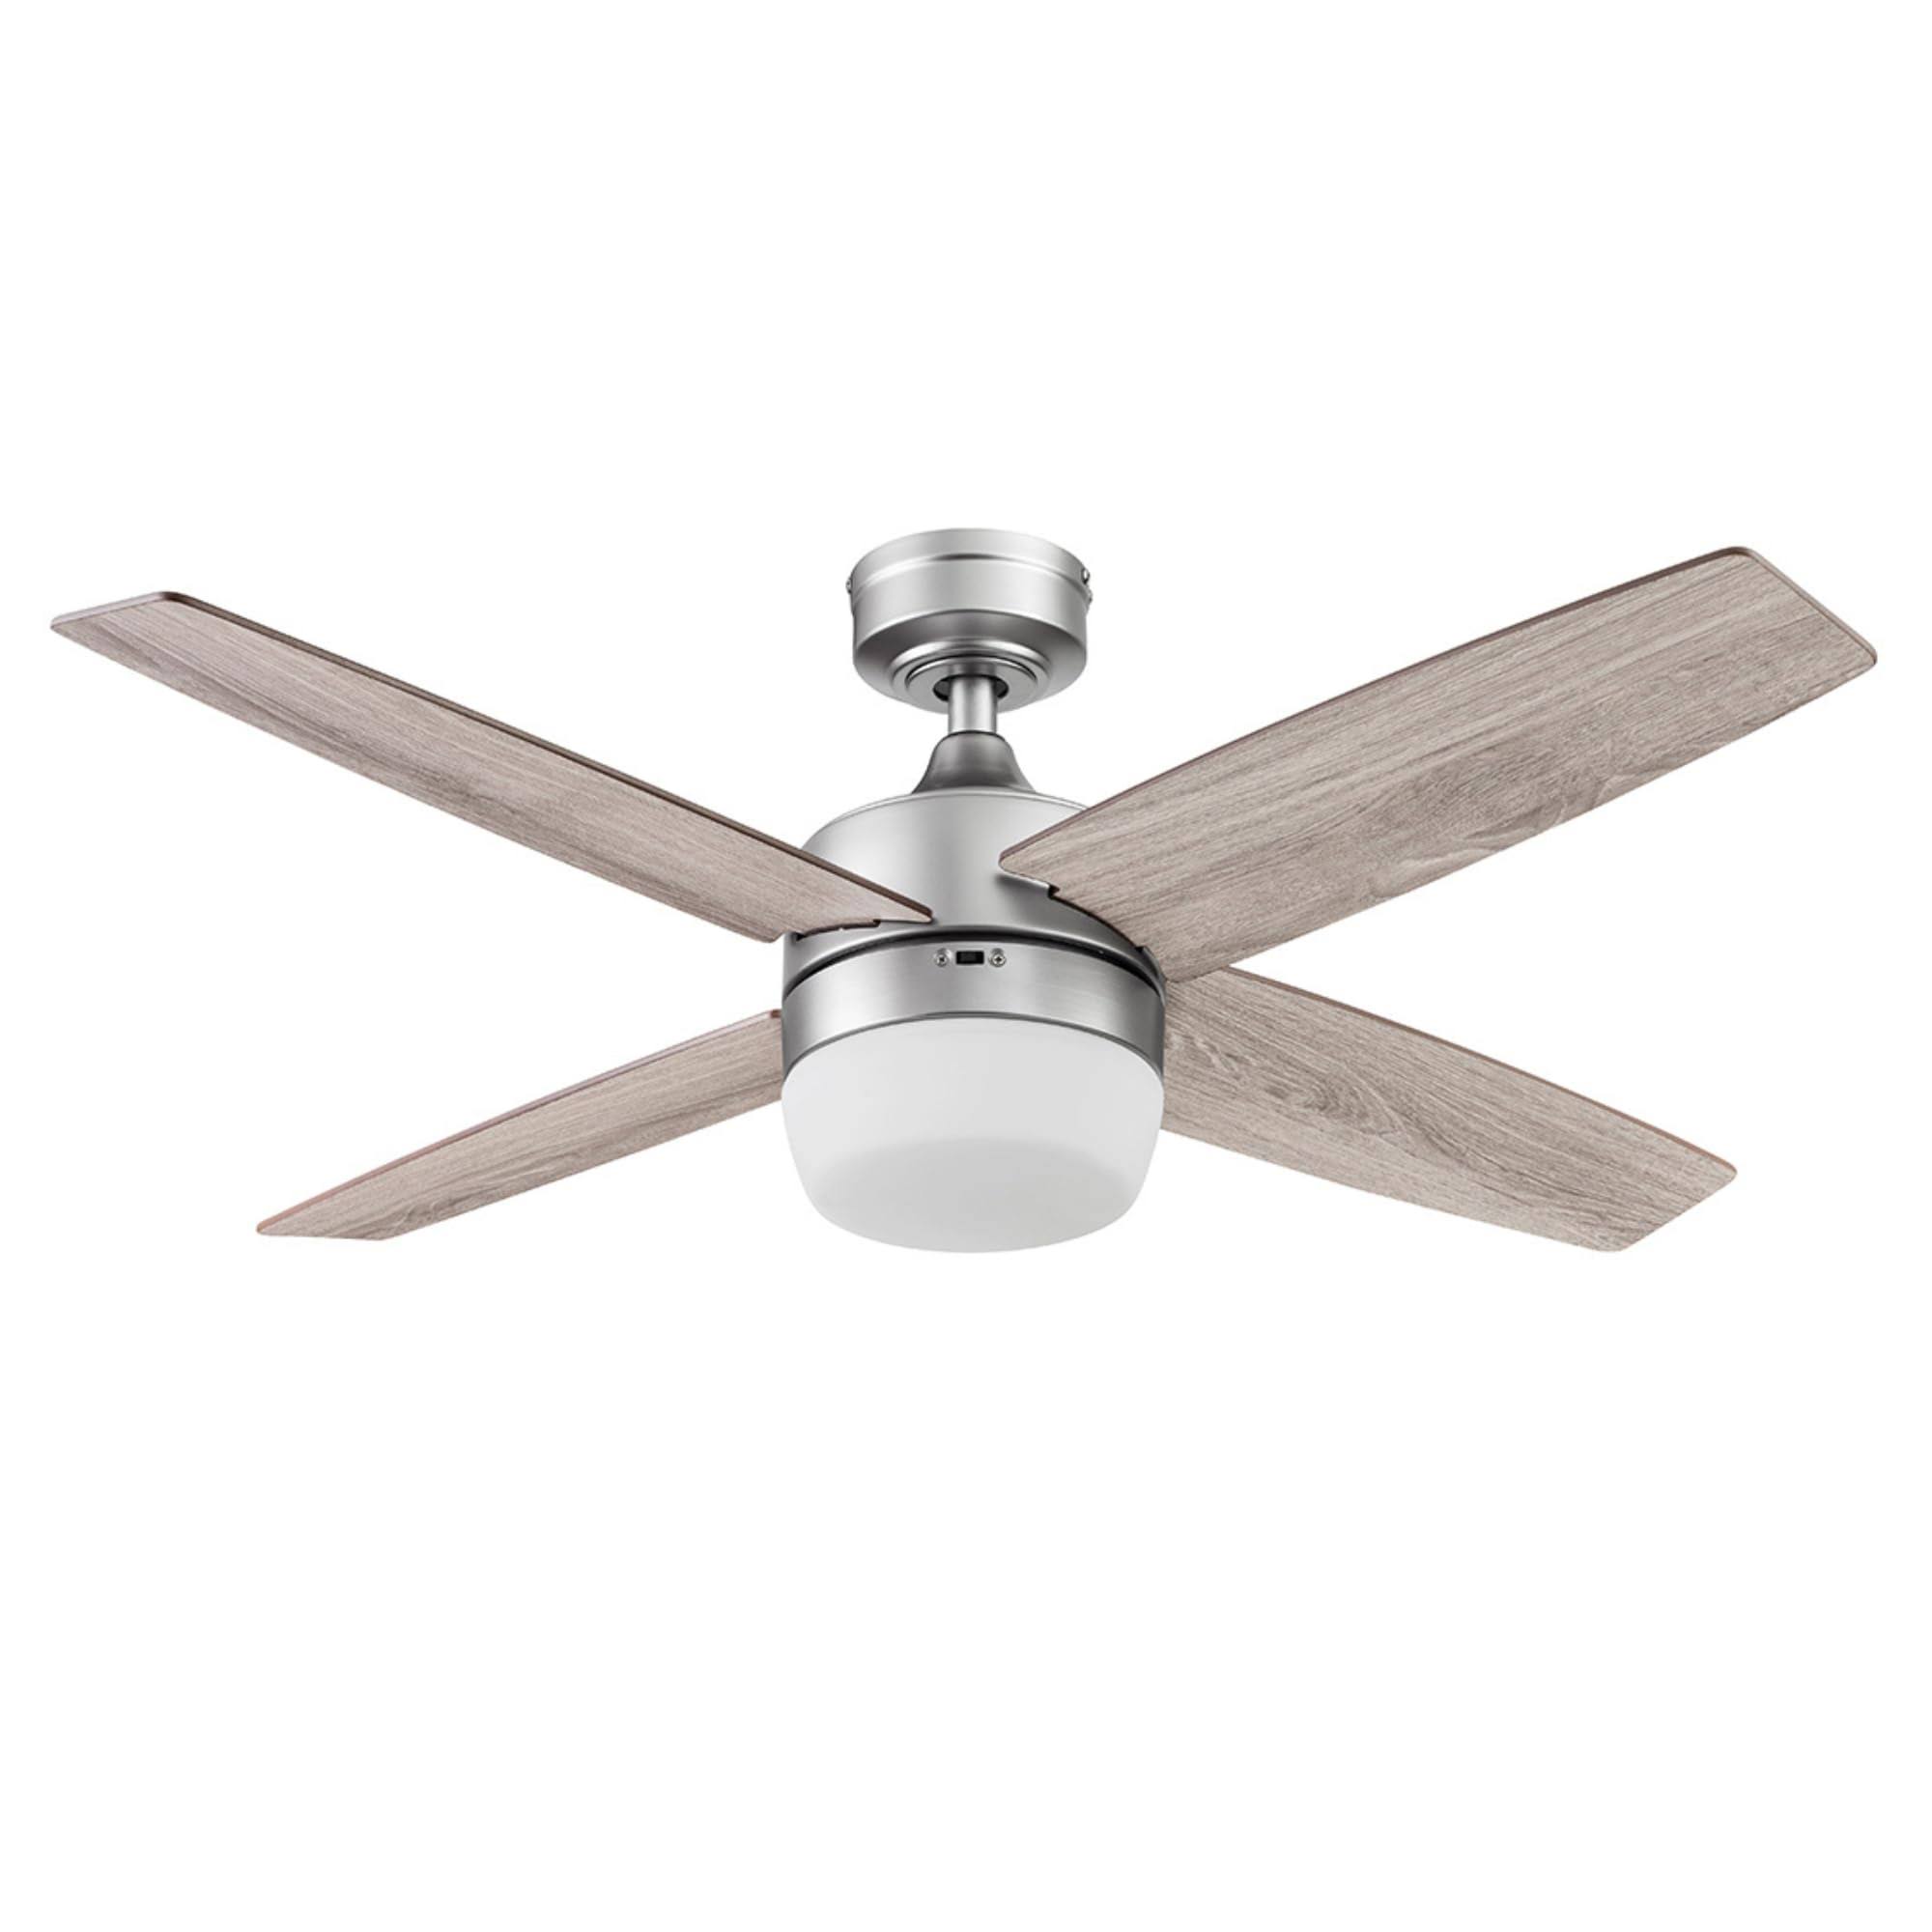 44" Atlas, Pewter, Remote Control, Ceiling Fan | Prominence Home